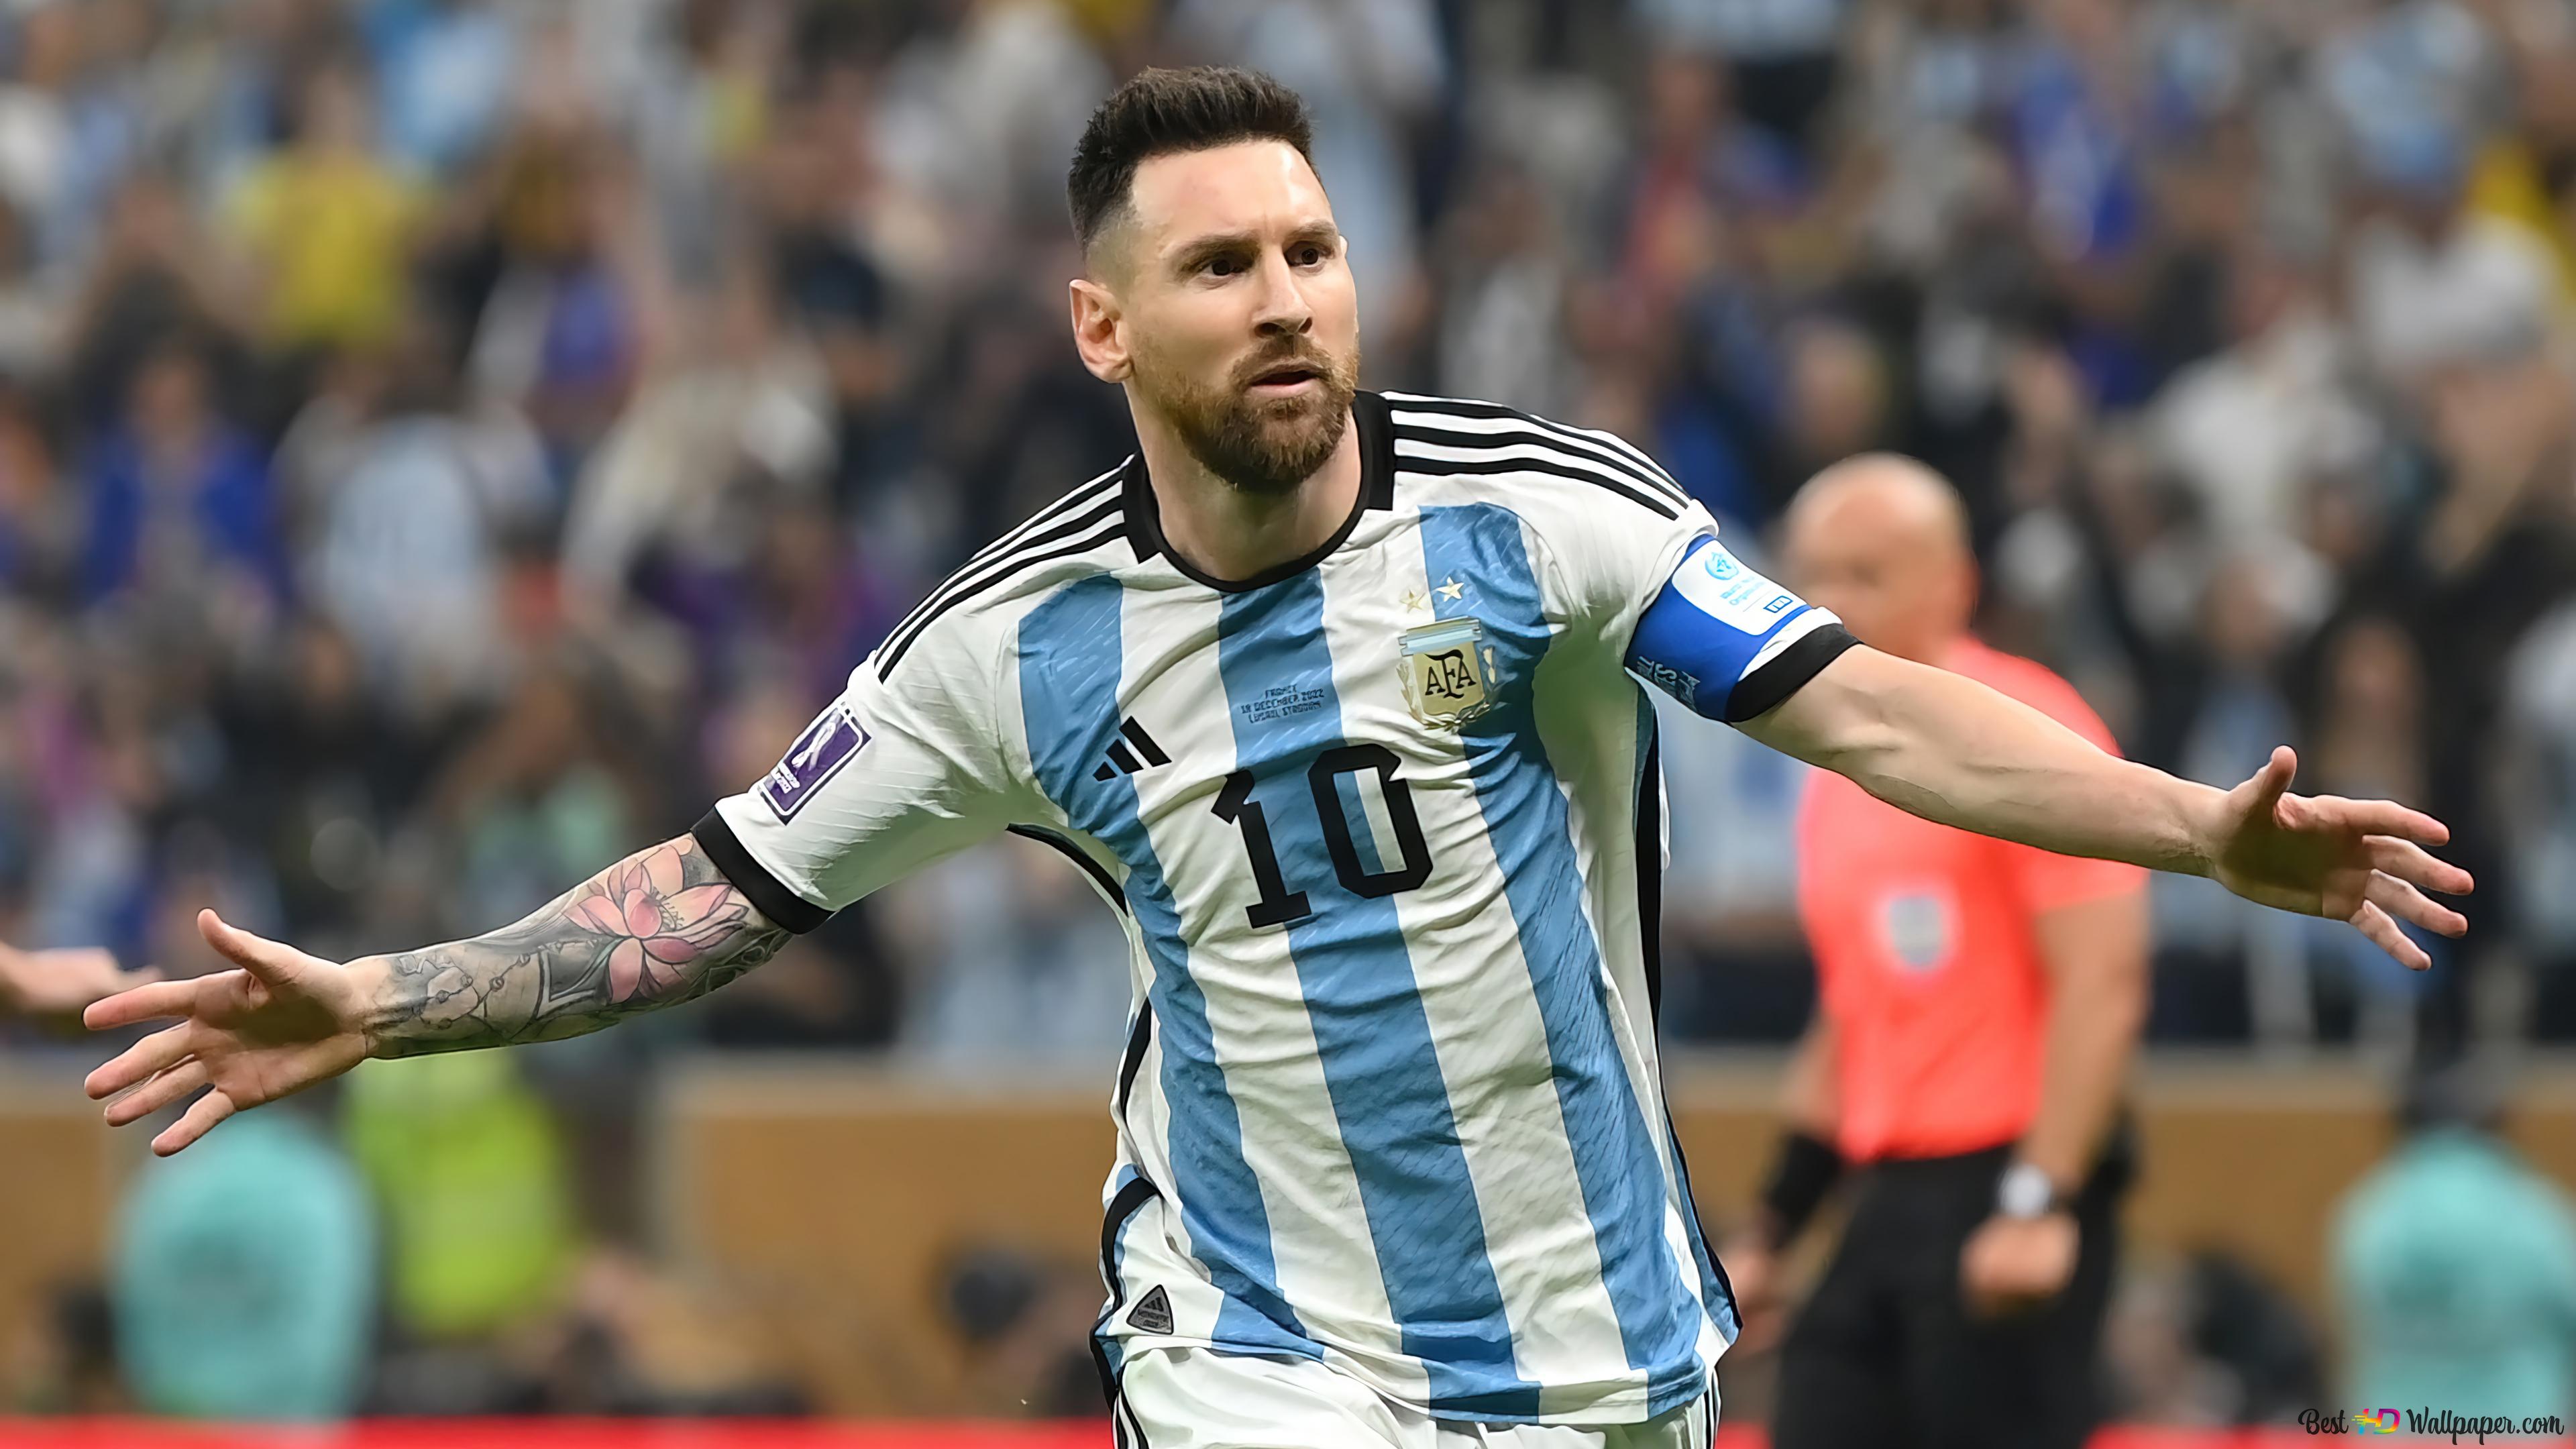 Fifa 2022 World Cup Lionel Messi 4K wallpaper download